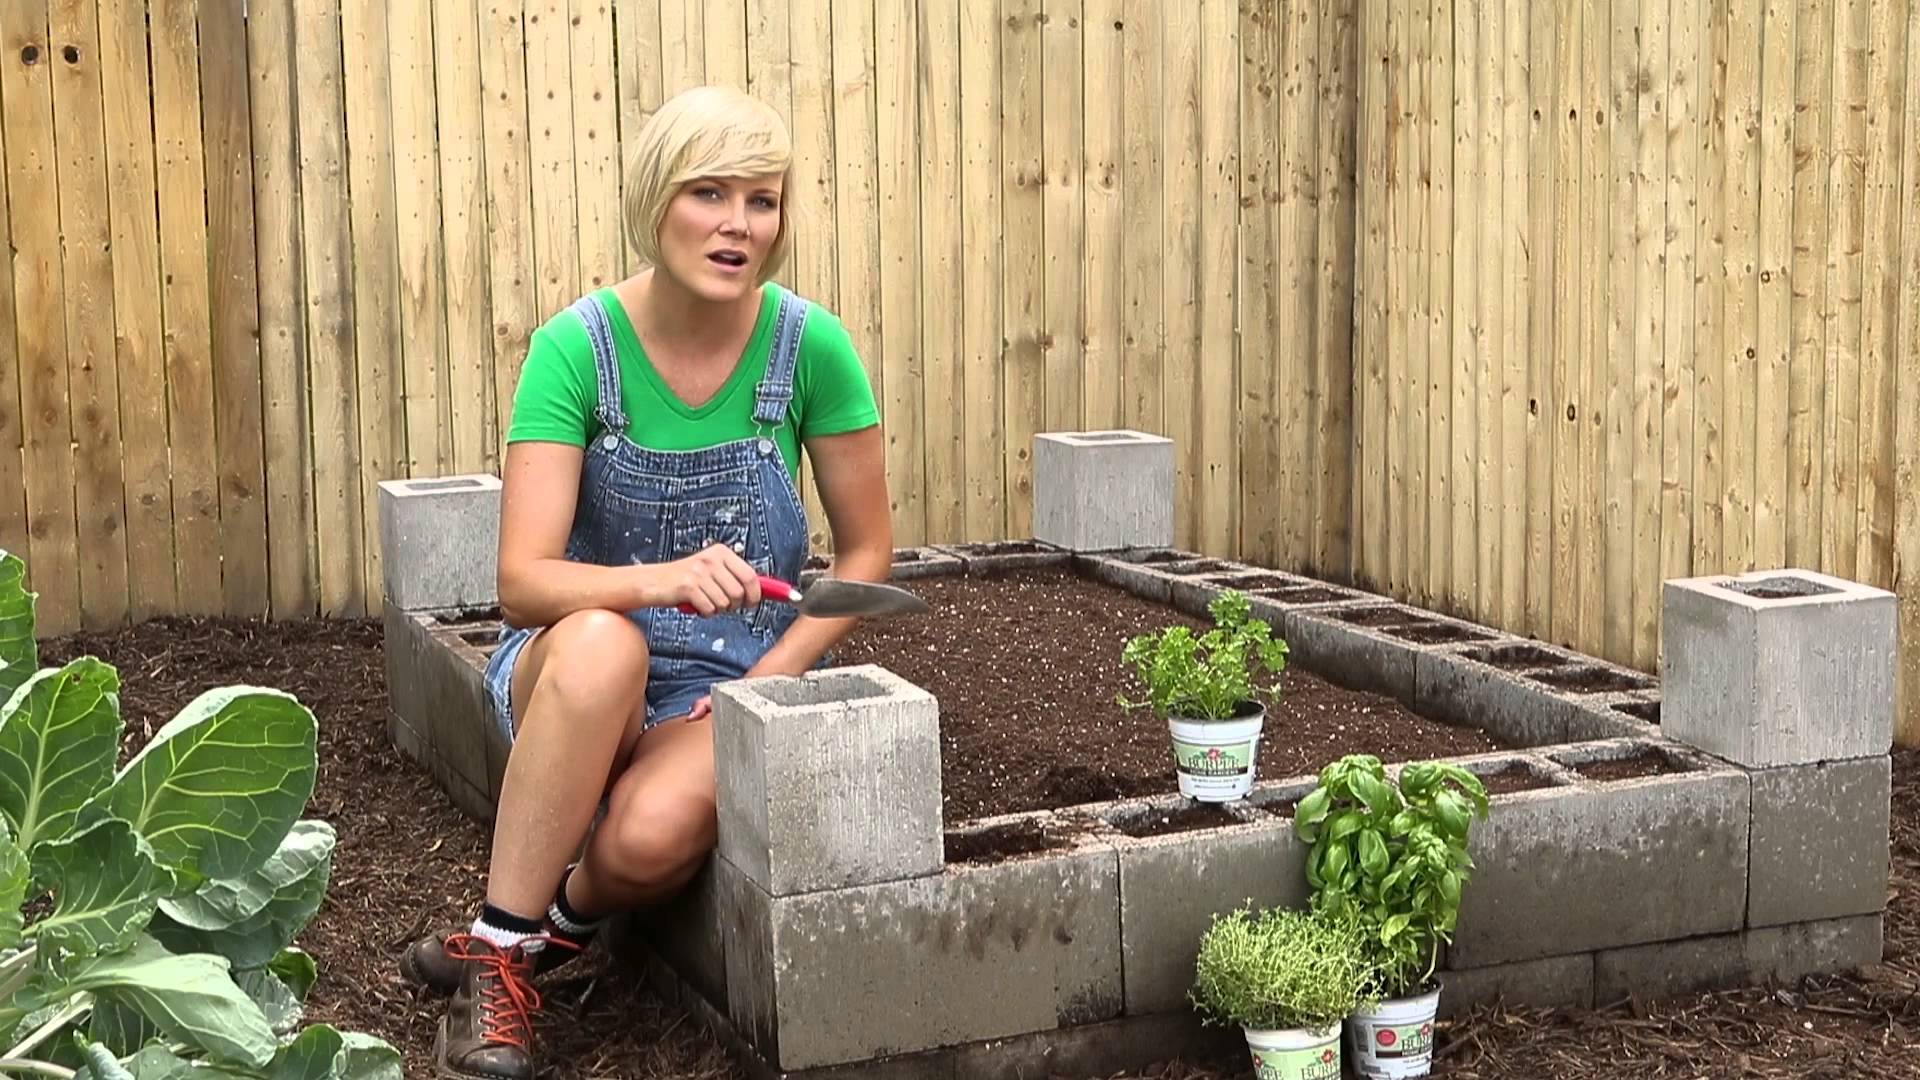 [VIDEO] BUILD A RAISED BED THE EASY WAY WITH CEMENT BLOCKS